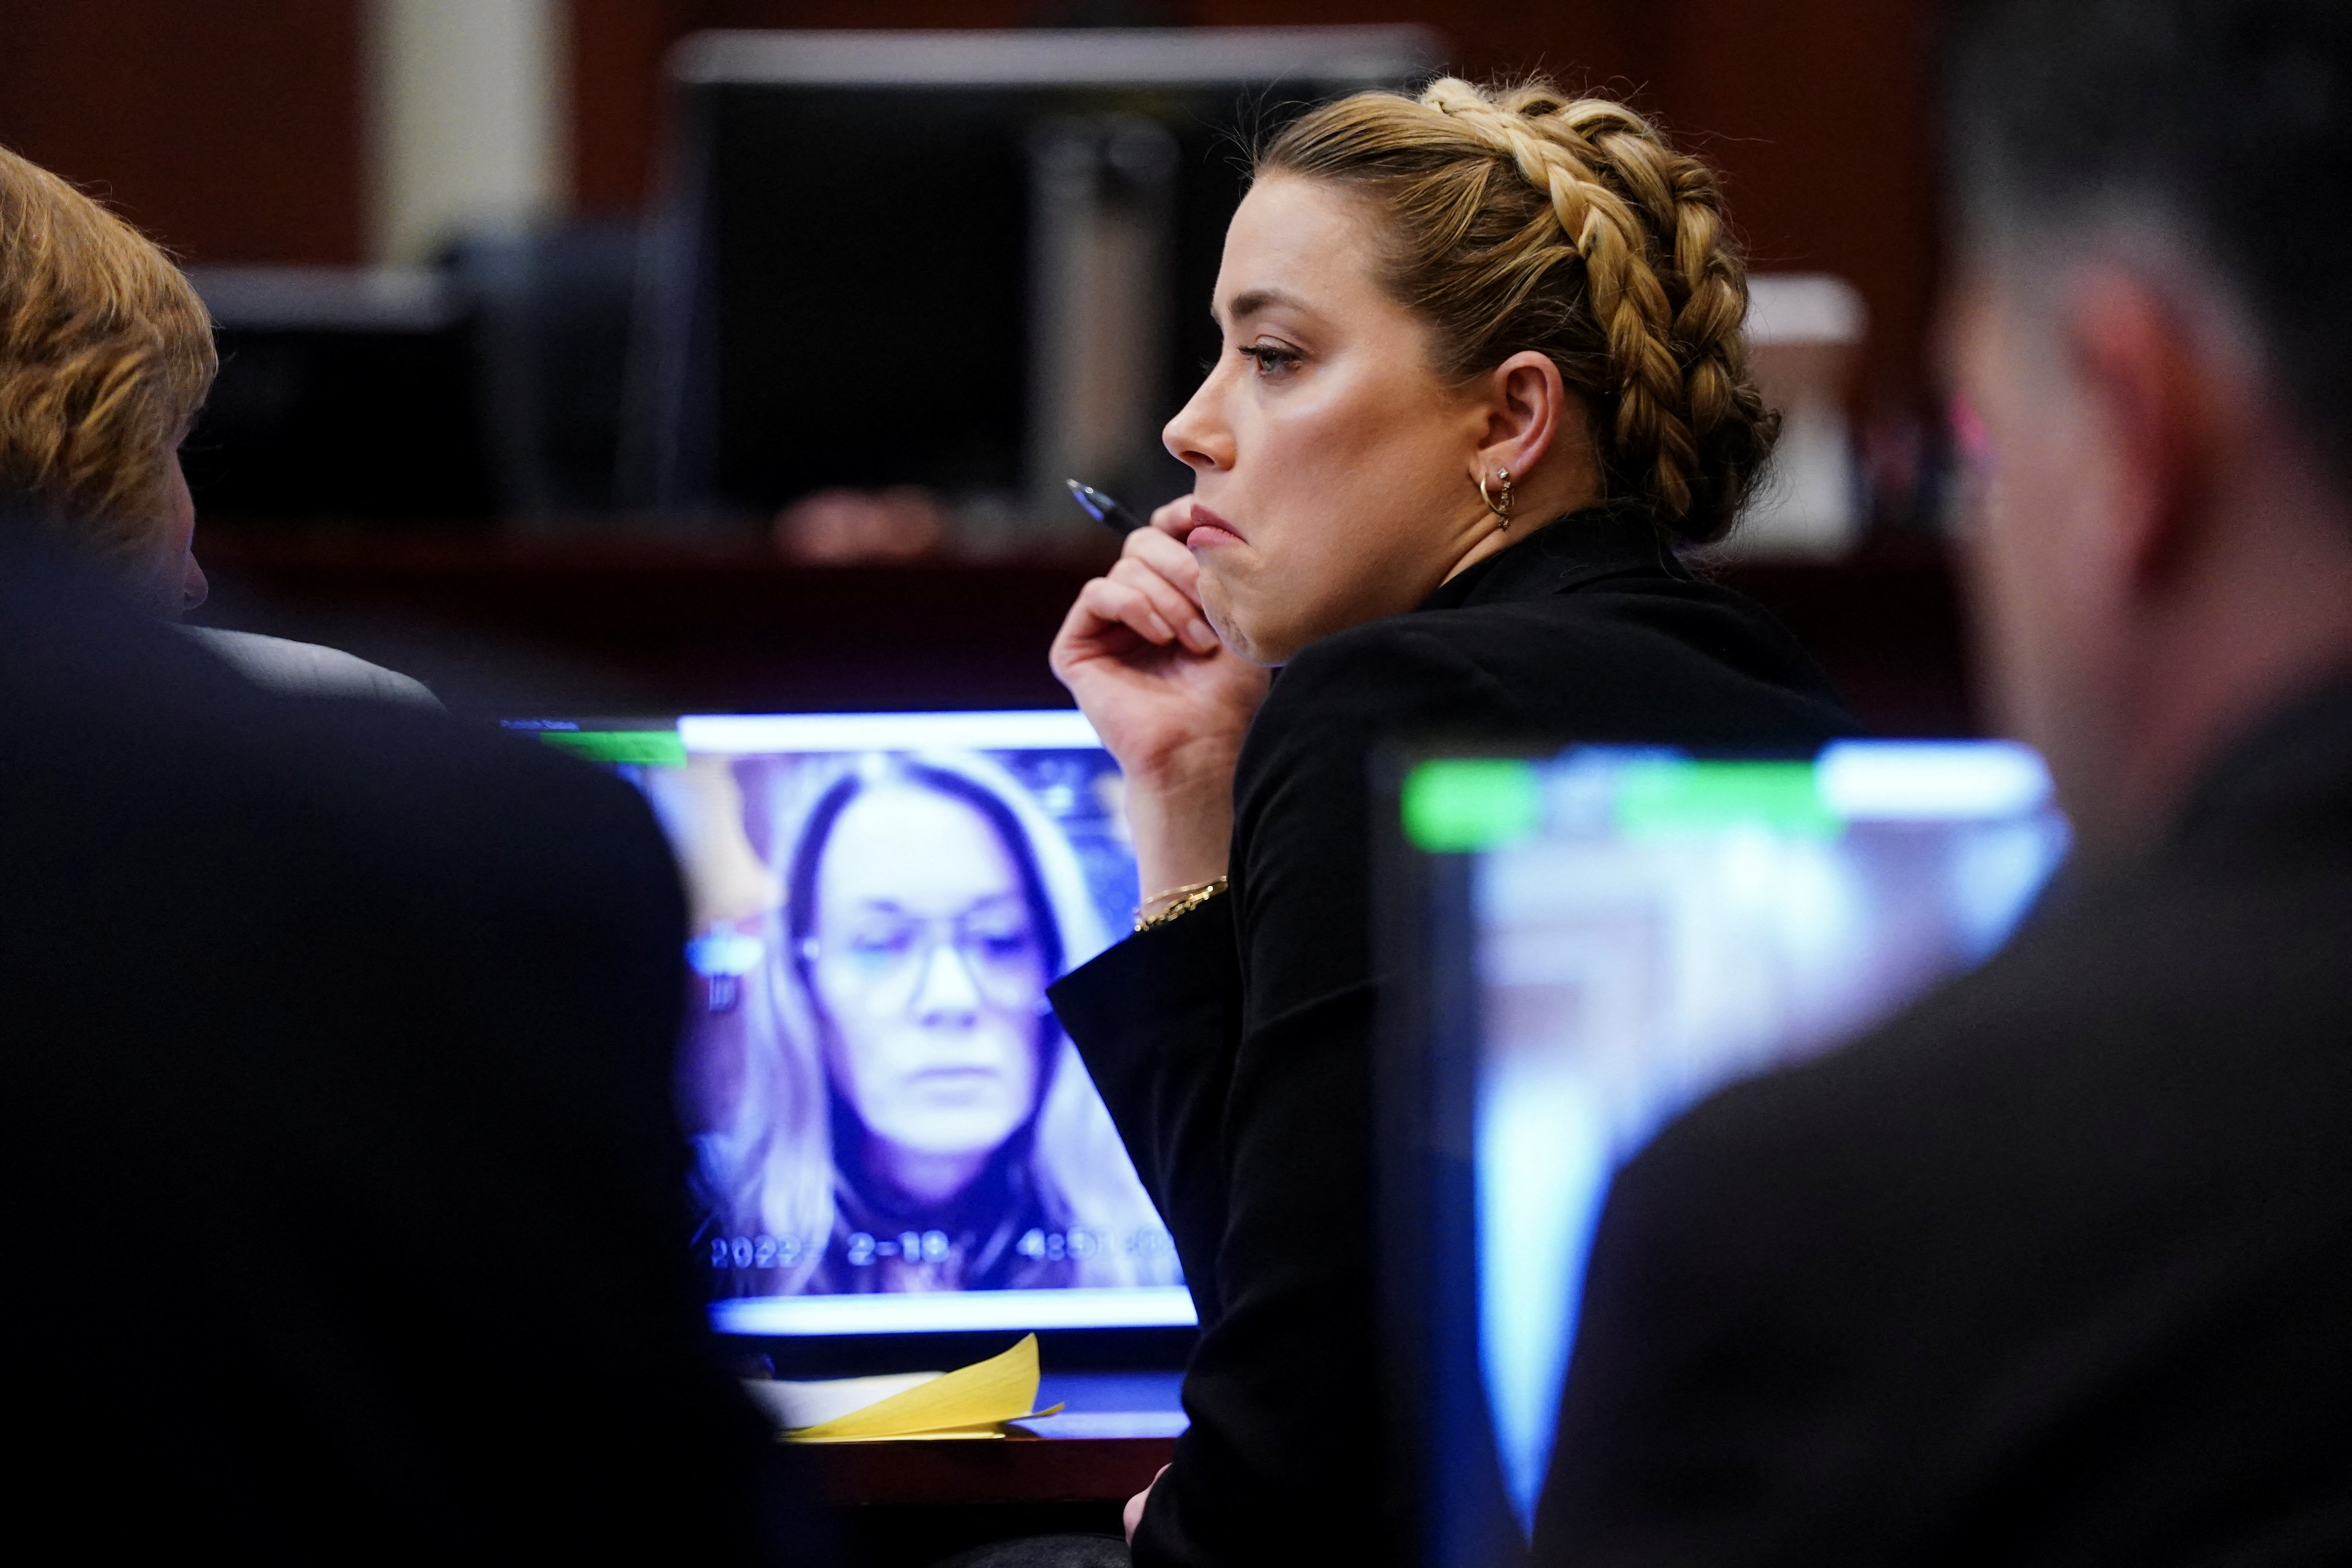 Actress Amber Heard listens to her former personal assistant Kate James testify via video during the Johnny Depp libel case against her (Reuters)